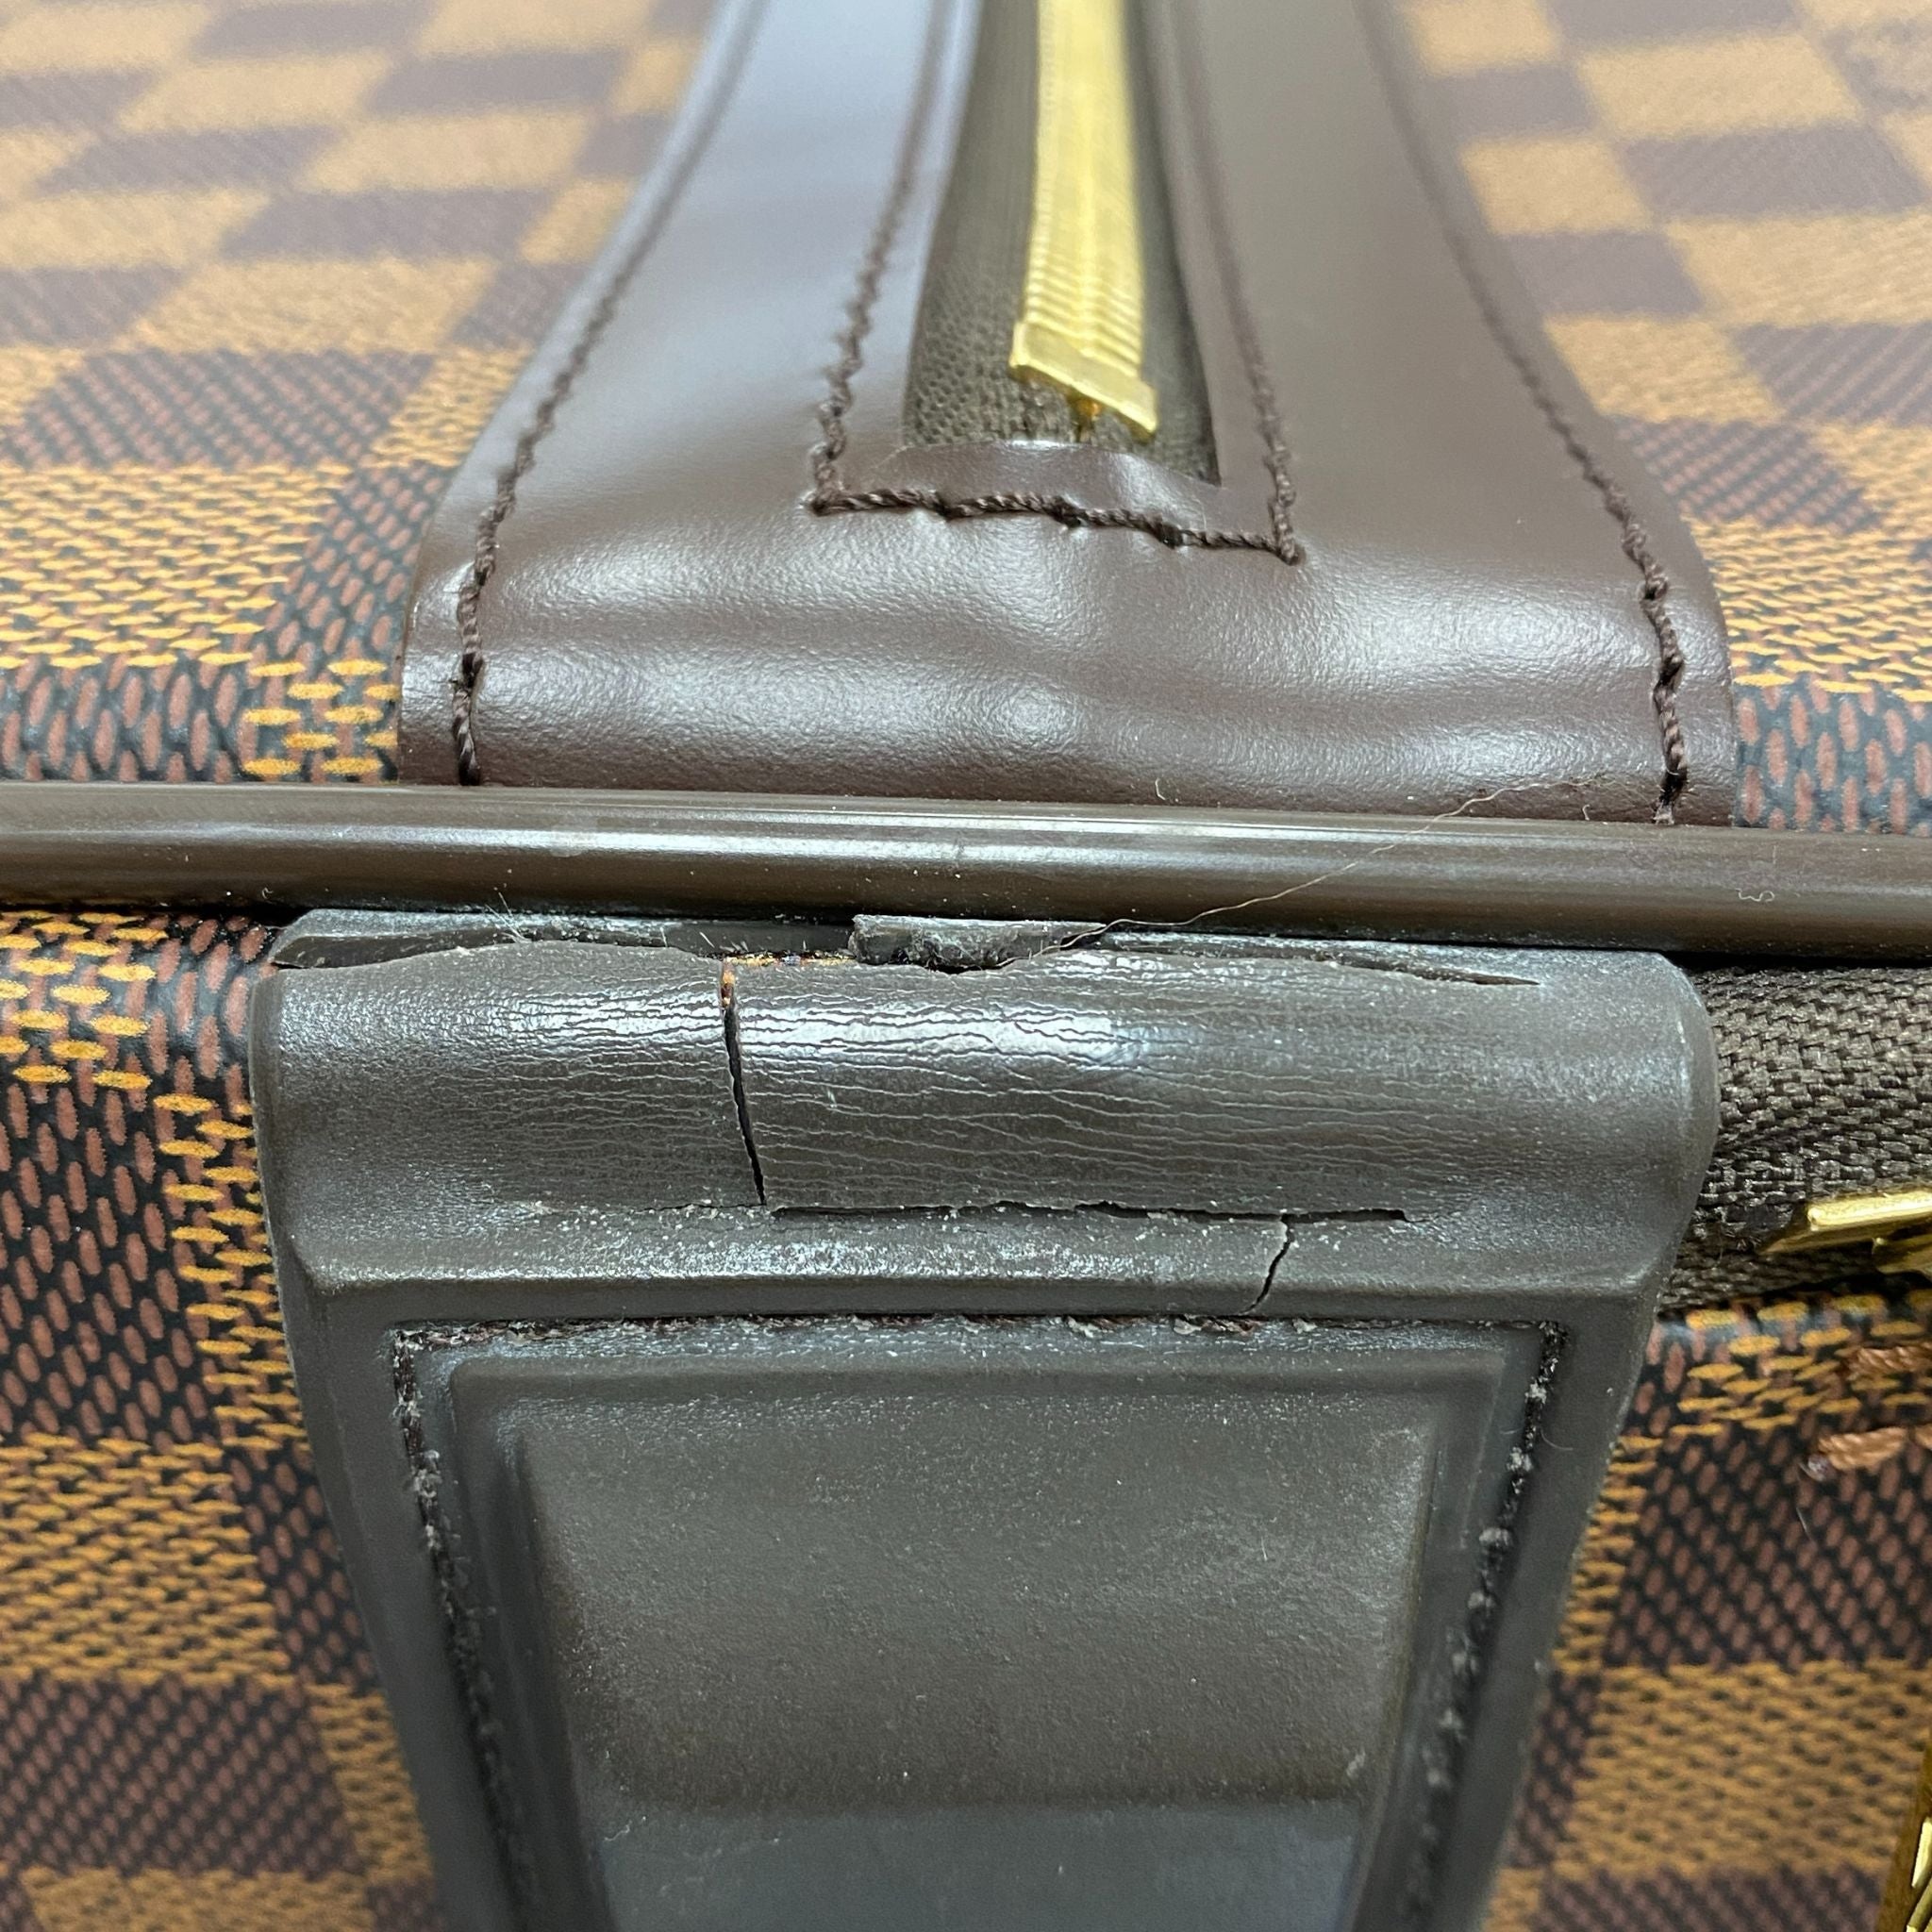 vuitton travel bag with wheels